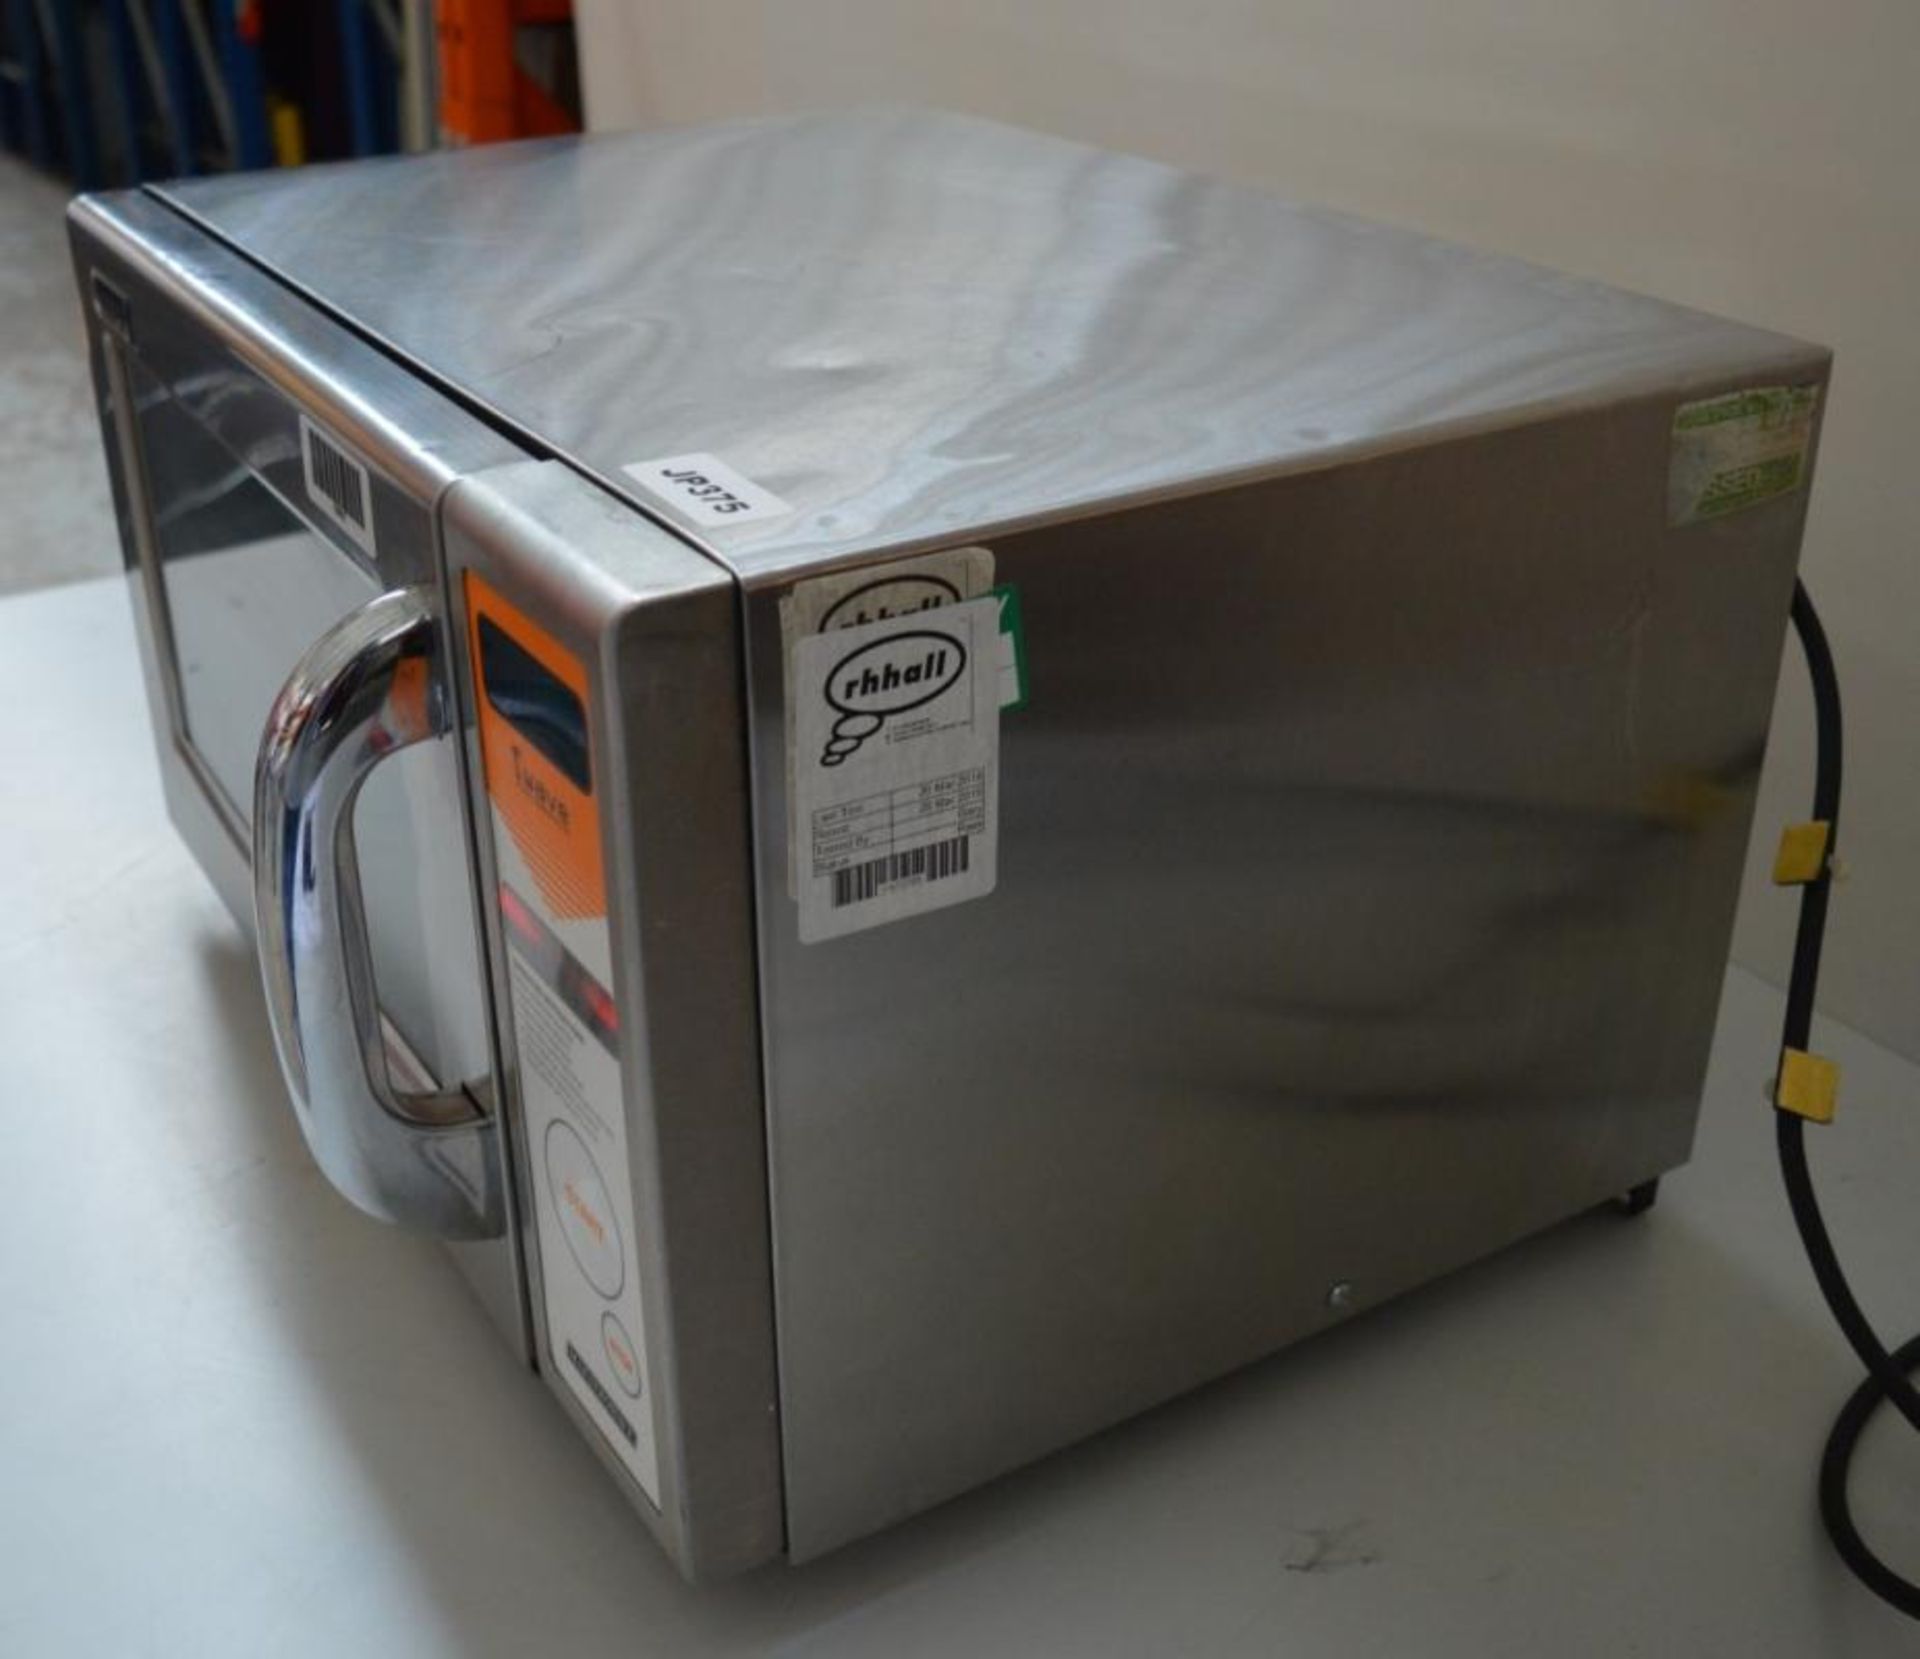 1 x iWave MiWAVE1000 Automated Foodservice Solution - Stainless Steel 1000w Catering Microwave - Image 13 of 14